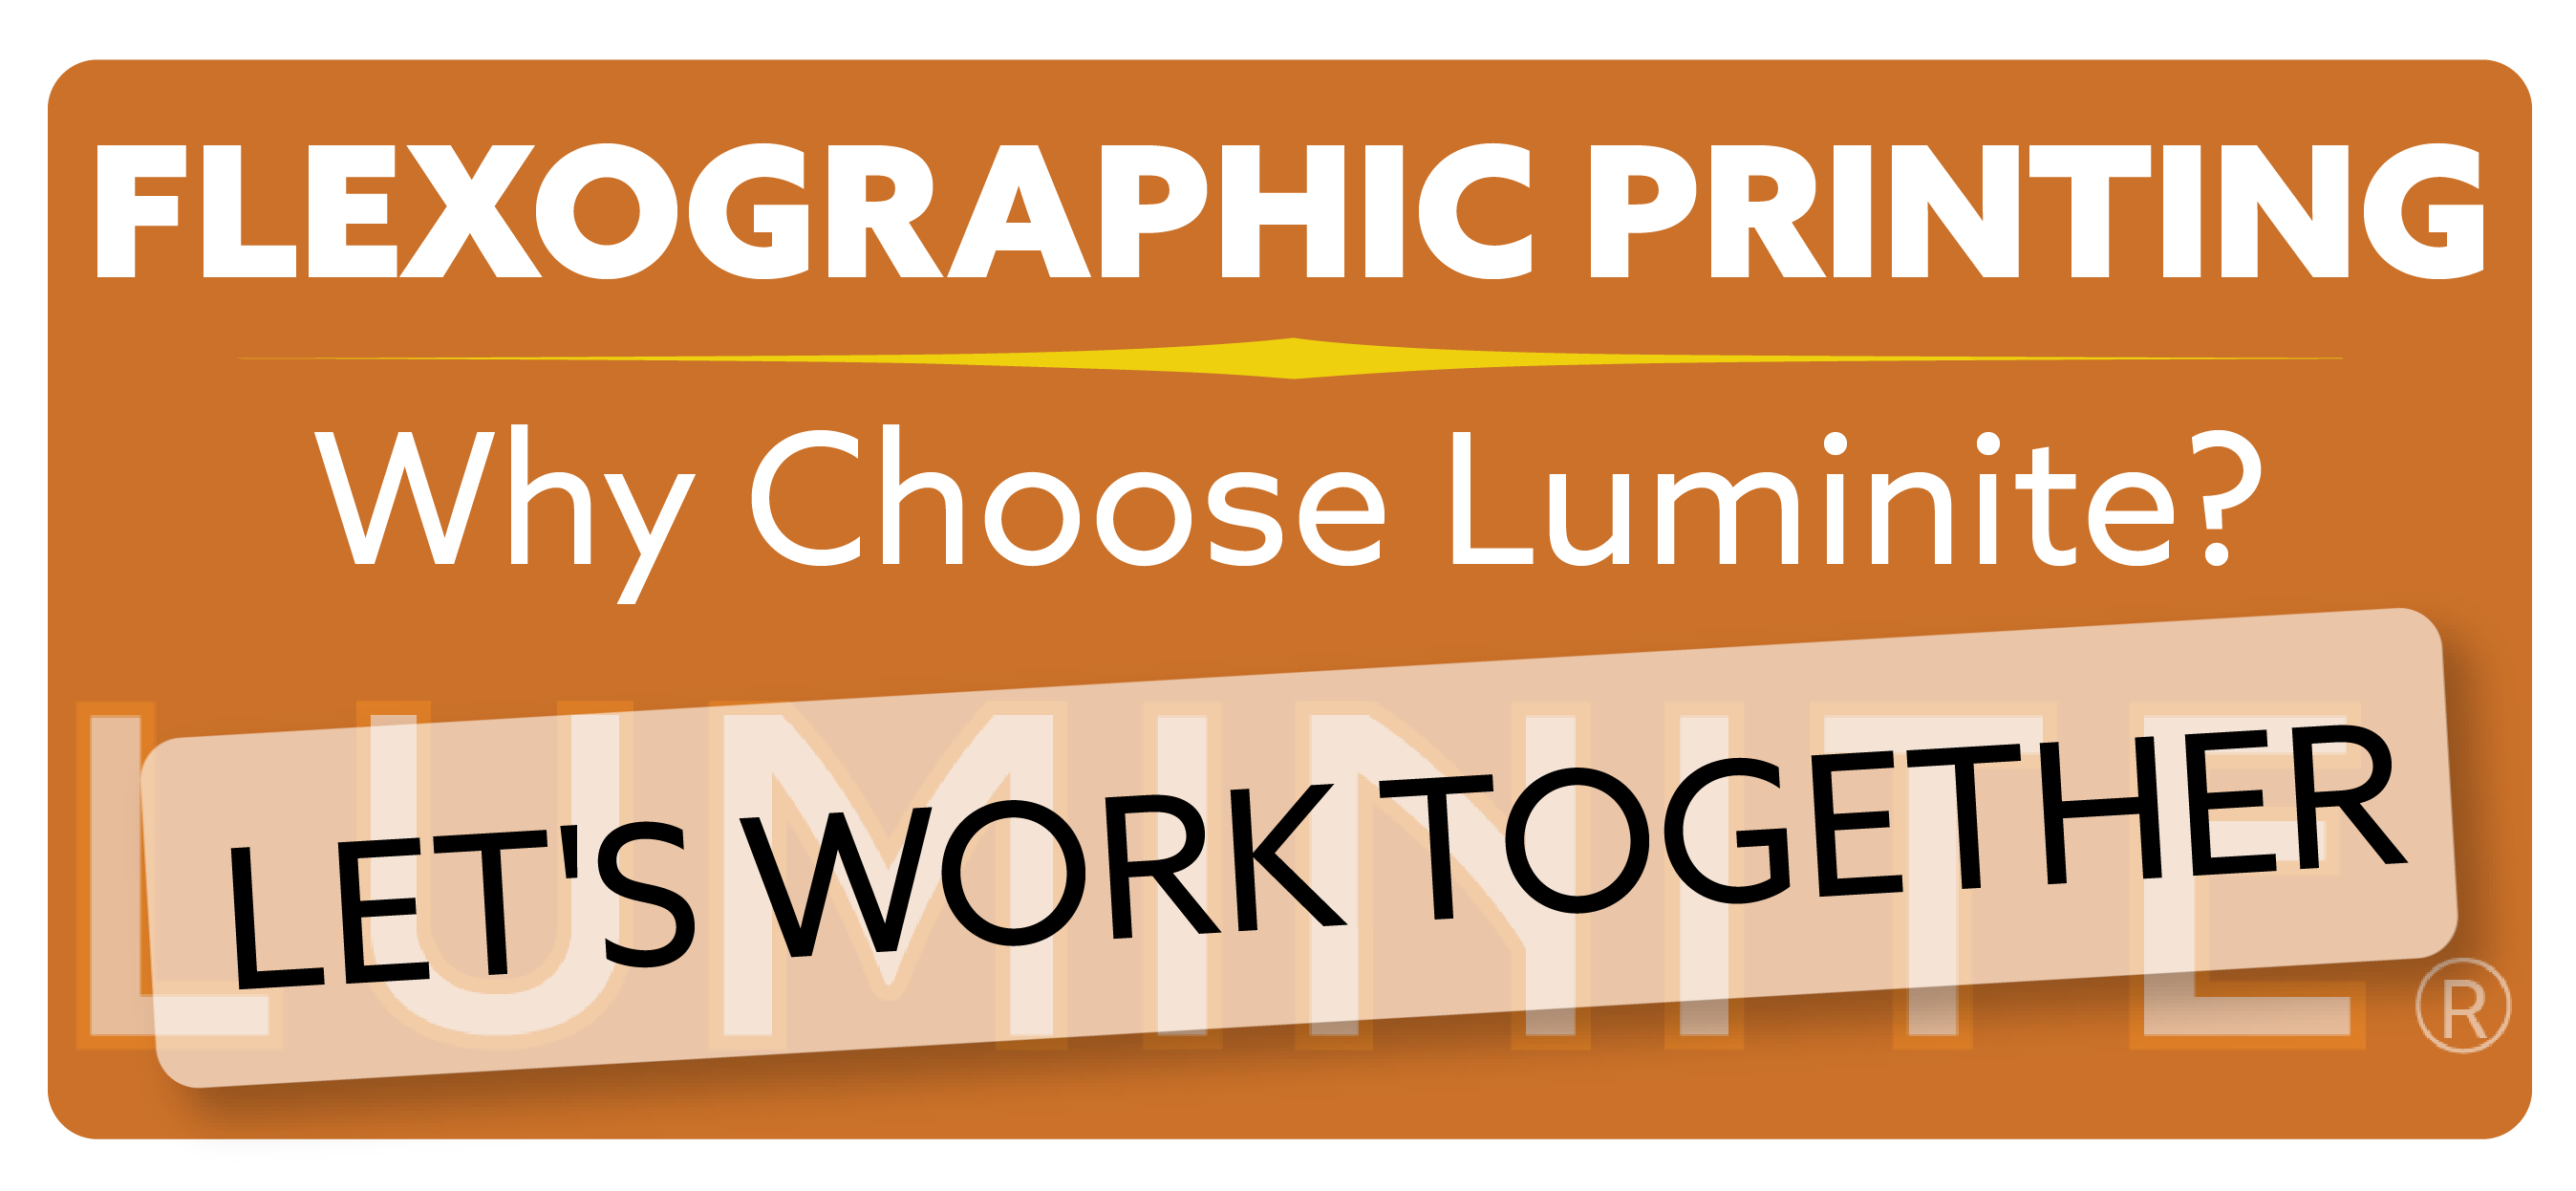 Why Choose Luminite for Flexographic Printing